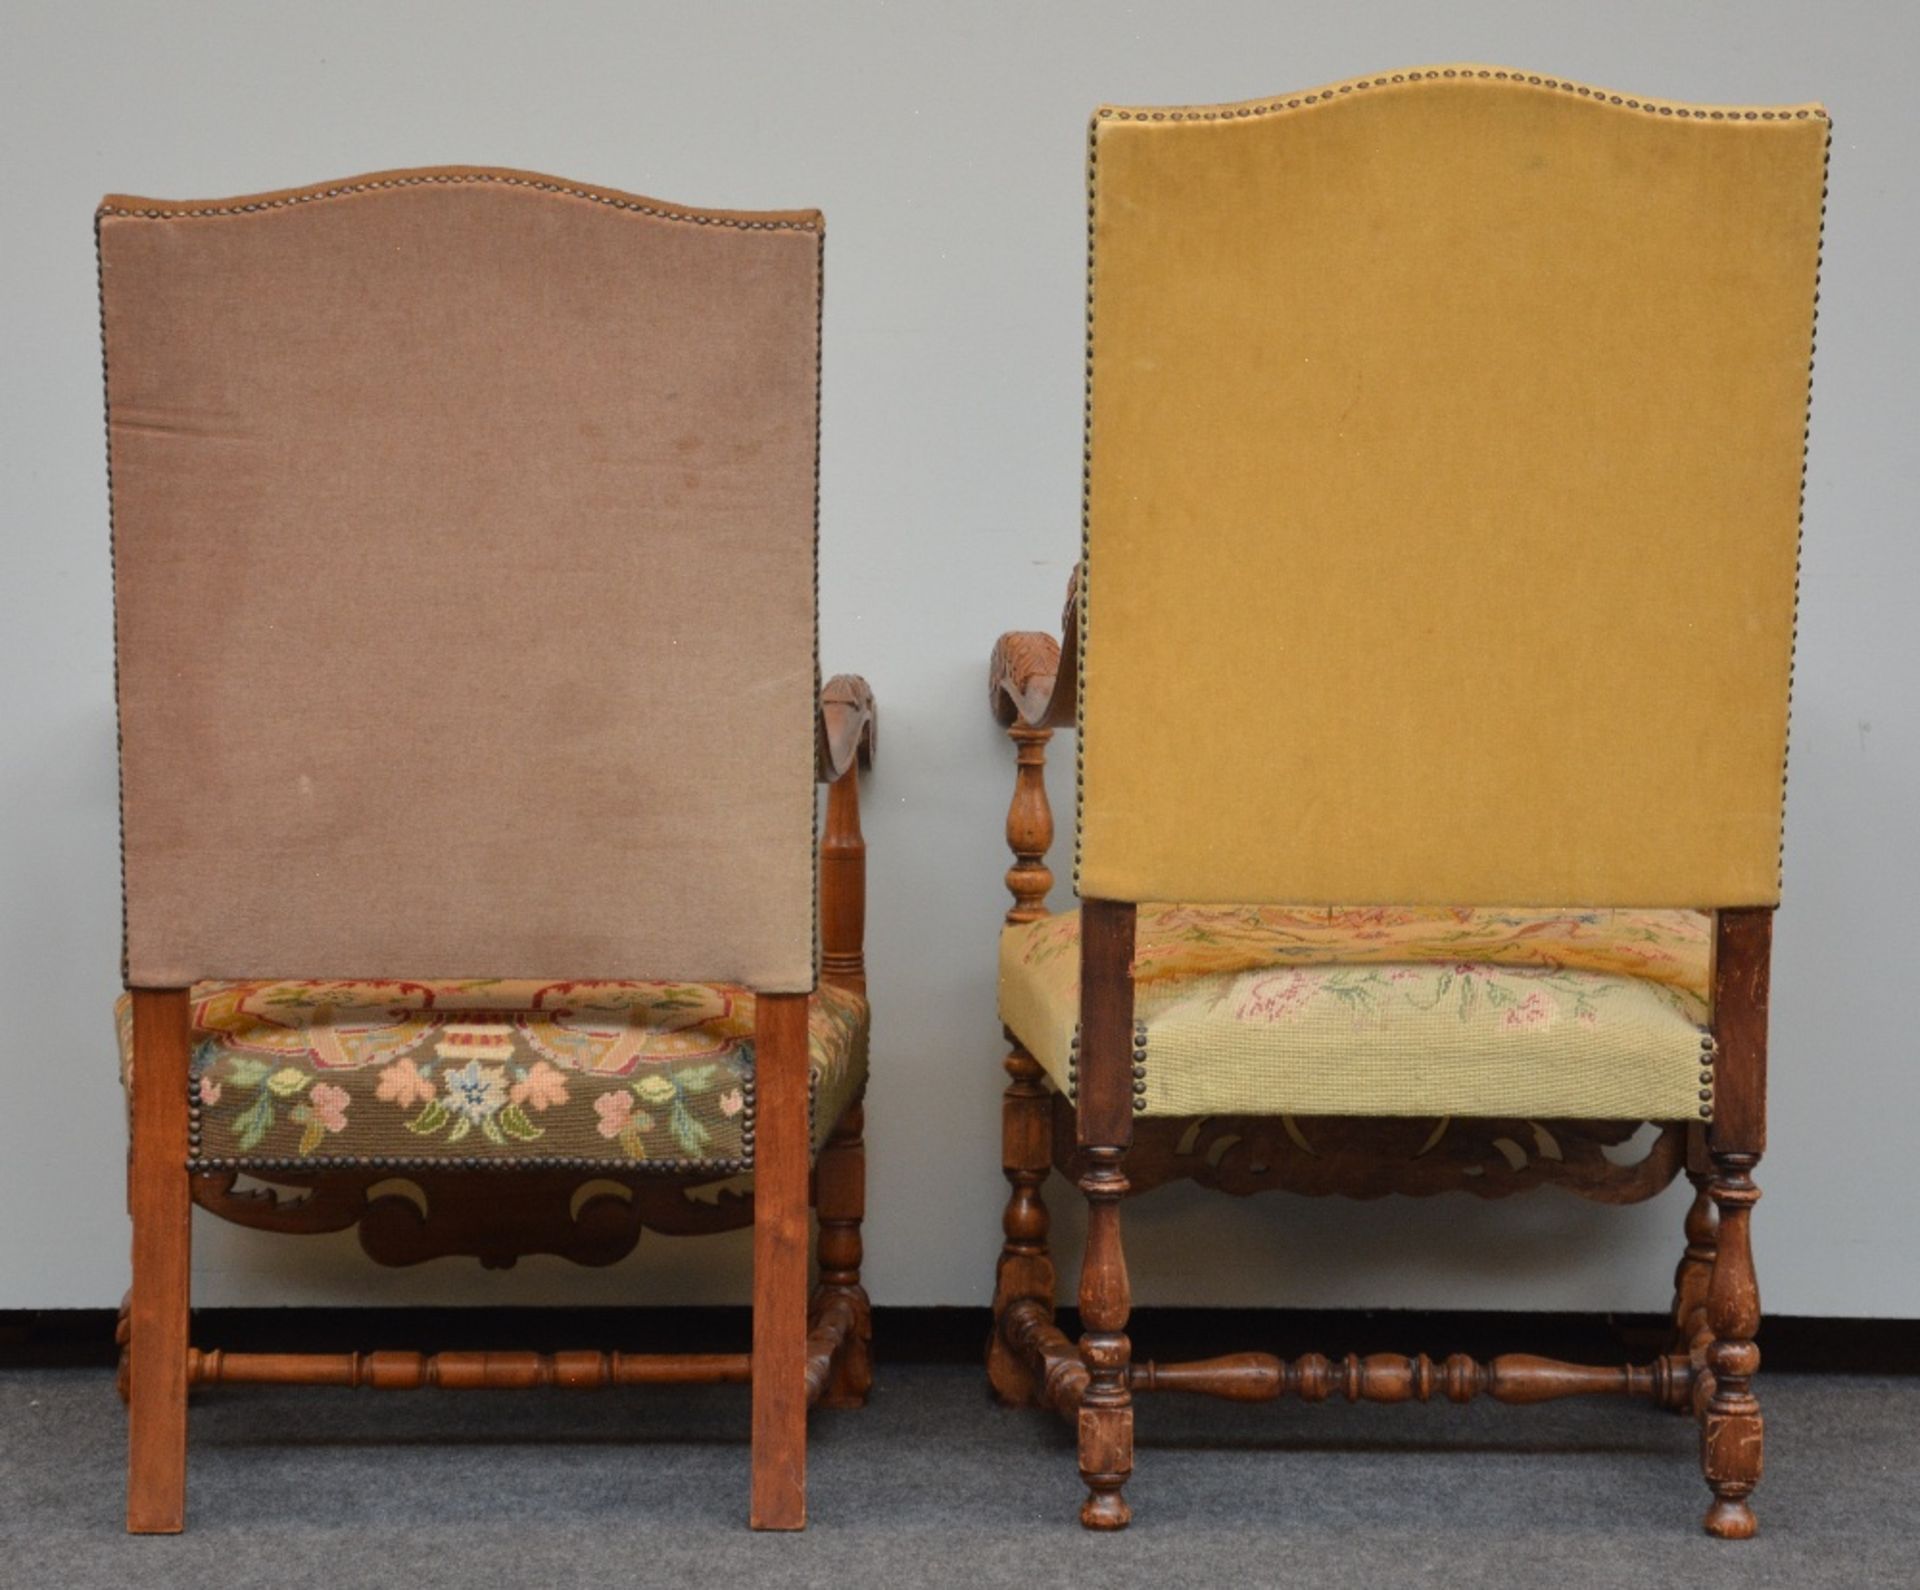 Two richly carved LXV-style armchairs with 'gros point' upholstery, H 111,5 / 119,5 - W 68 cm - Bild 3 aus 4